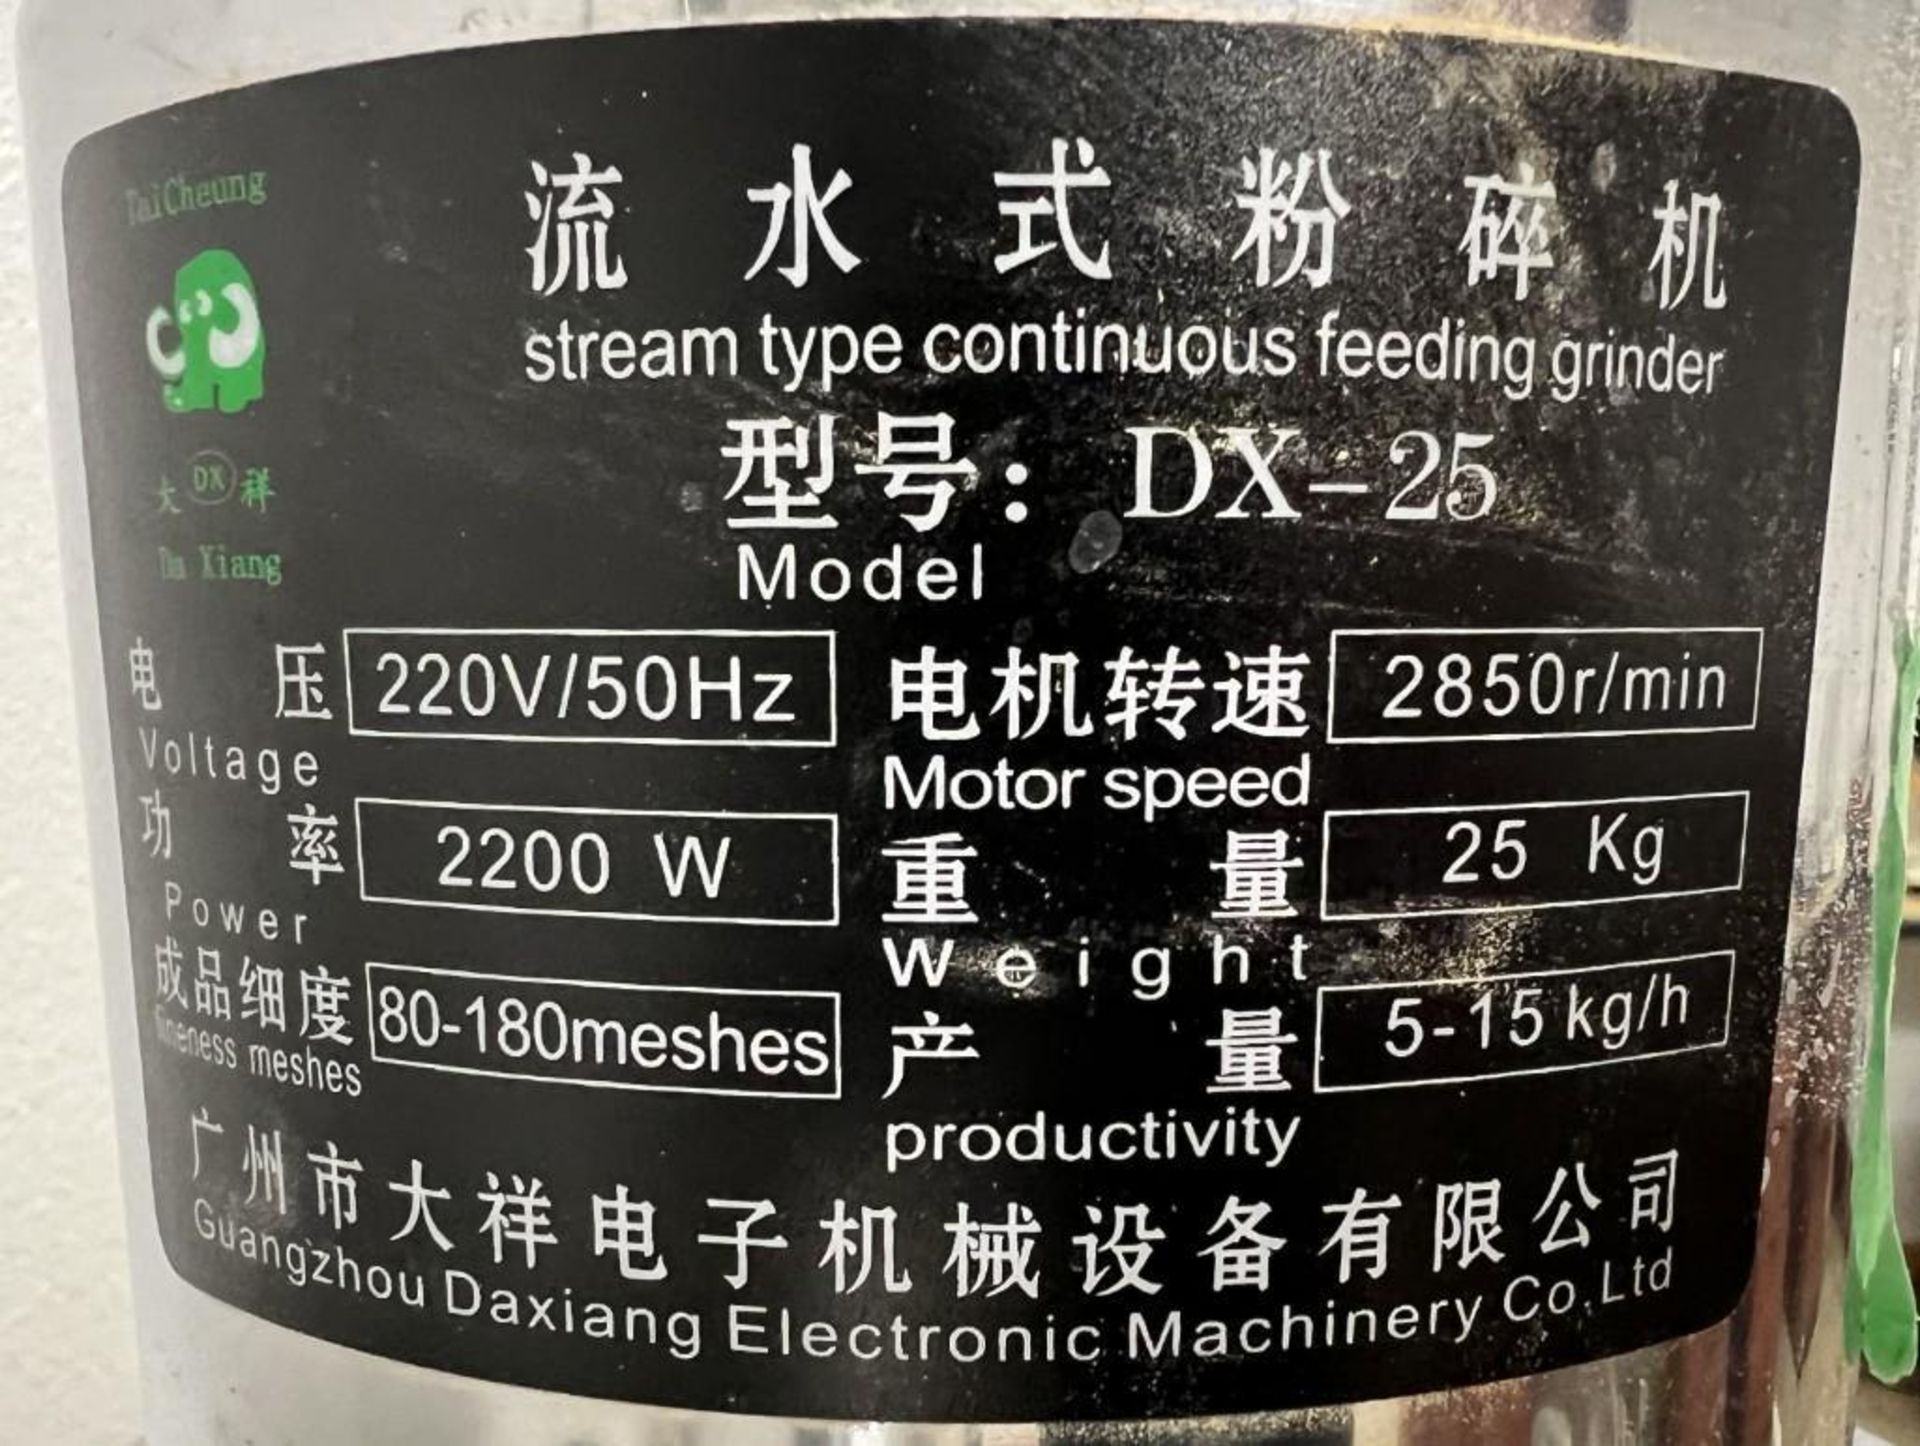 Tai Cheung Stream Type Continuous Feeding Grinder, Model DX-25. With power transformer. - Image 8 of 8